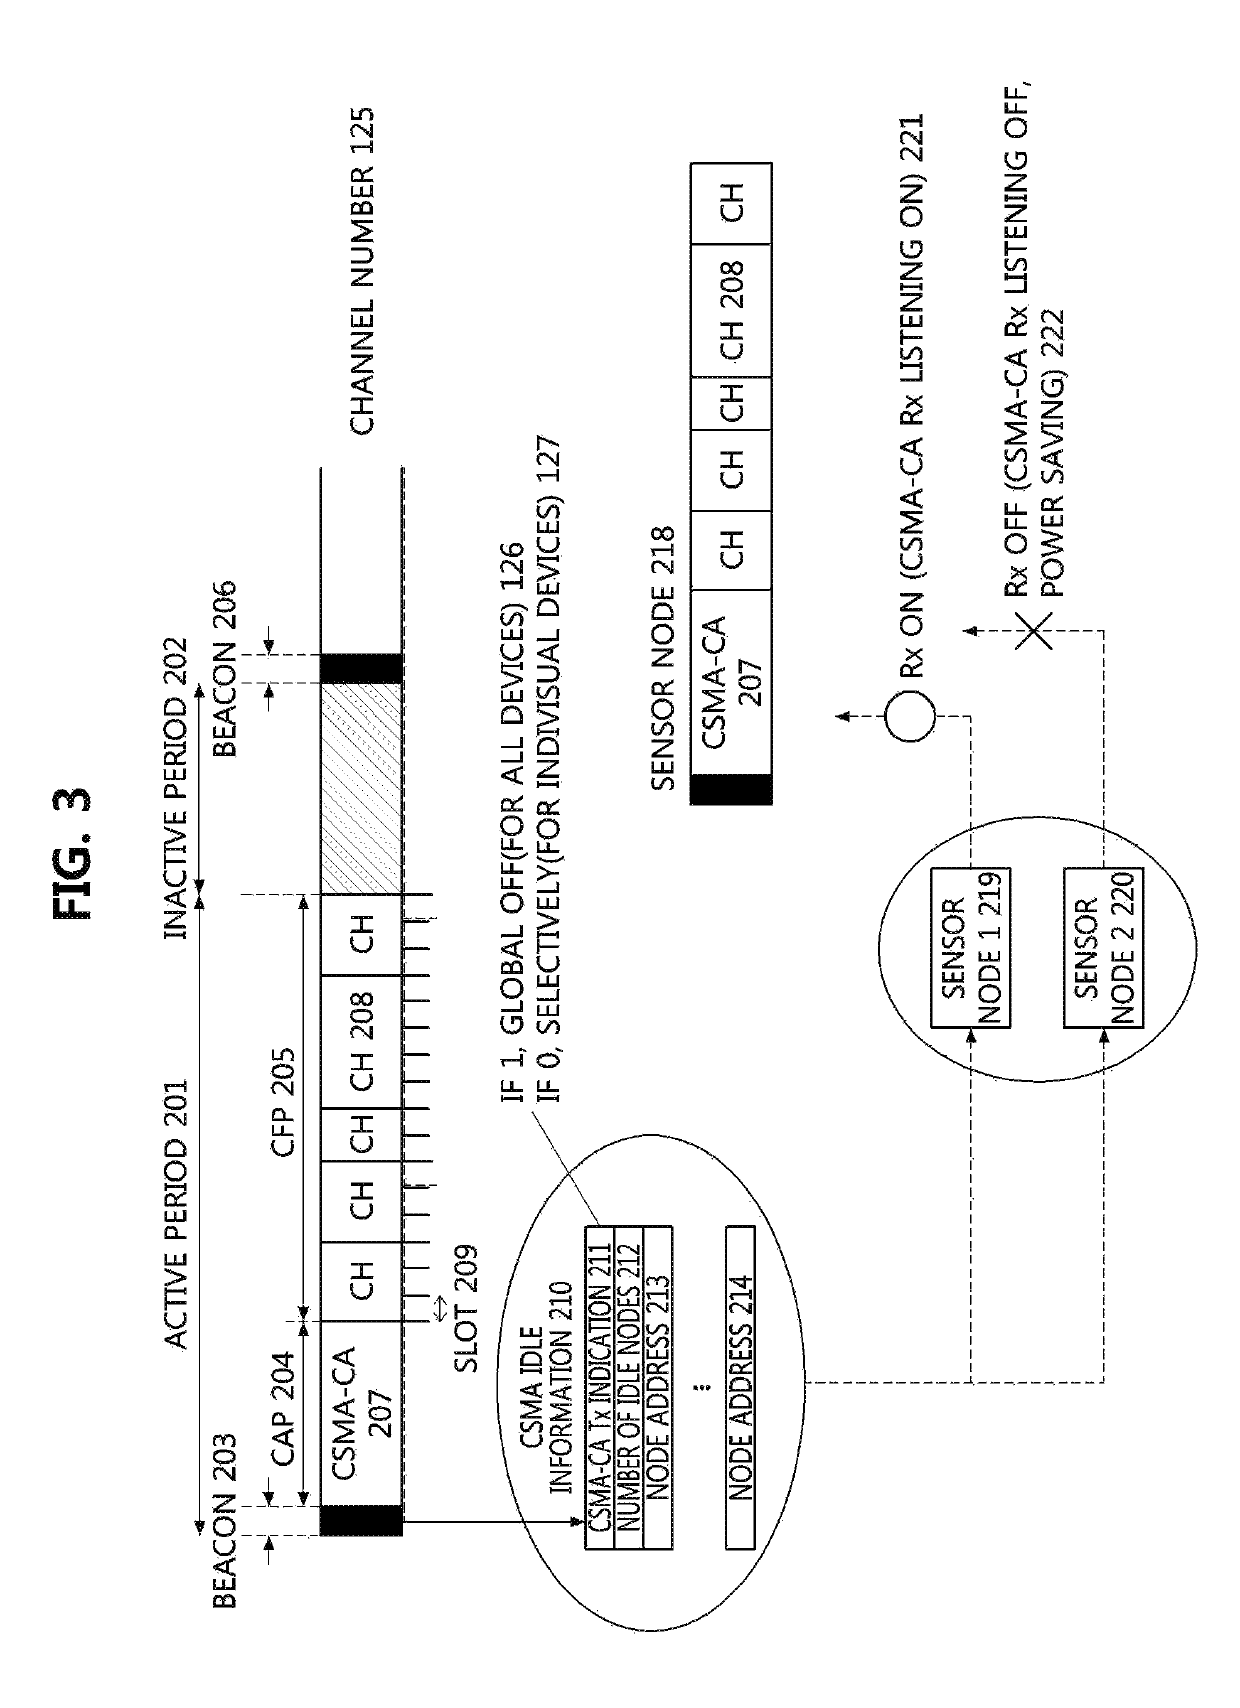 Channel allocation system and method for accommodating multiple nodes in sensor network